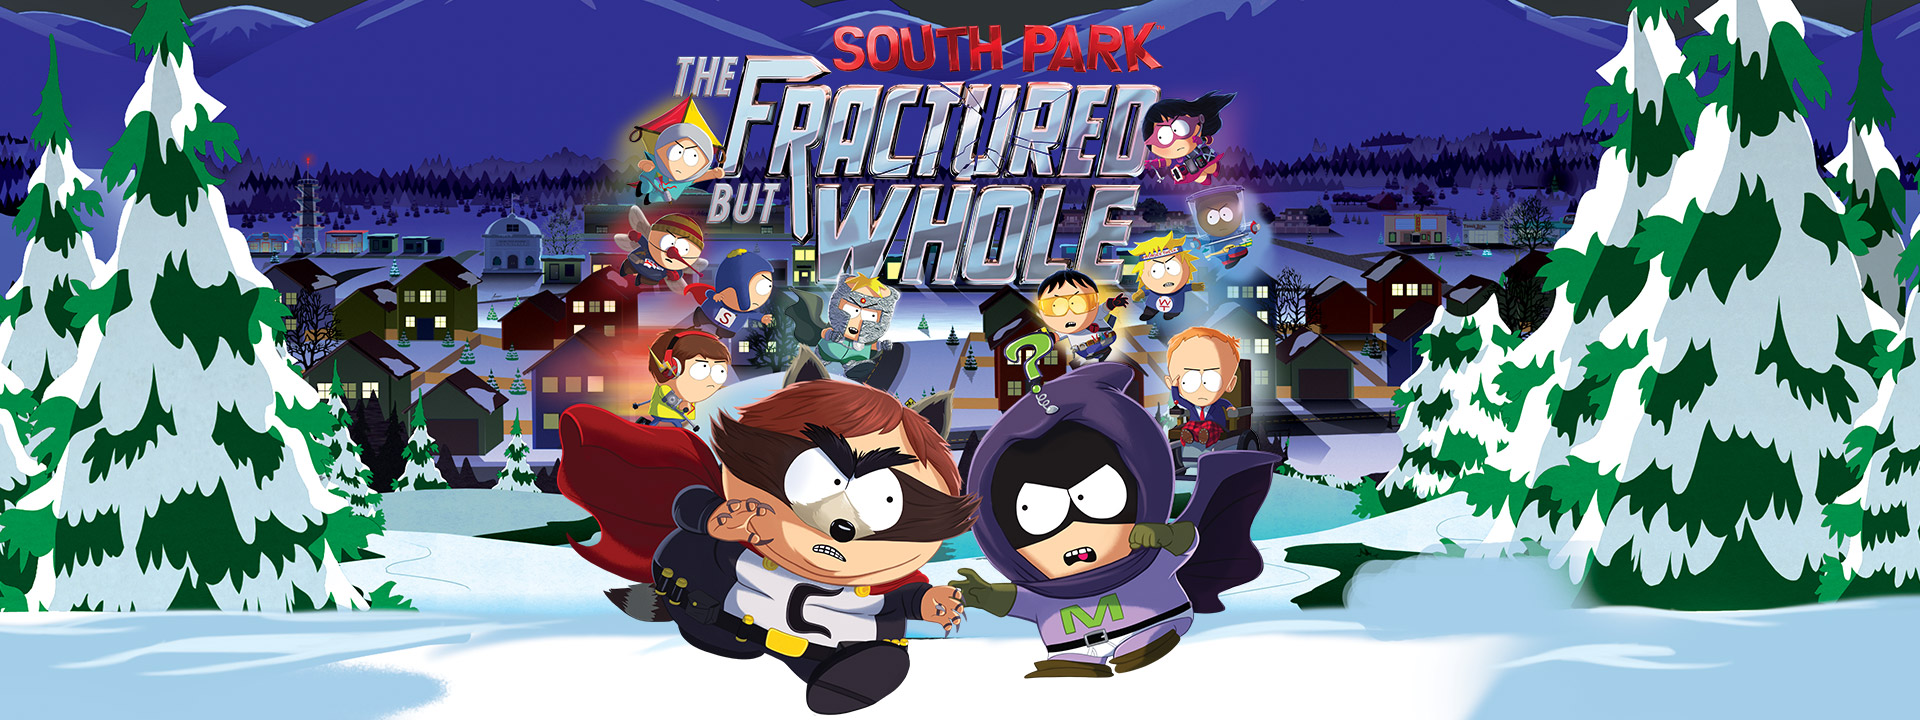 south park fractured but whole free torrent